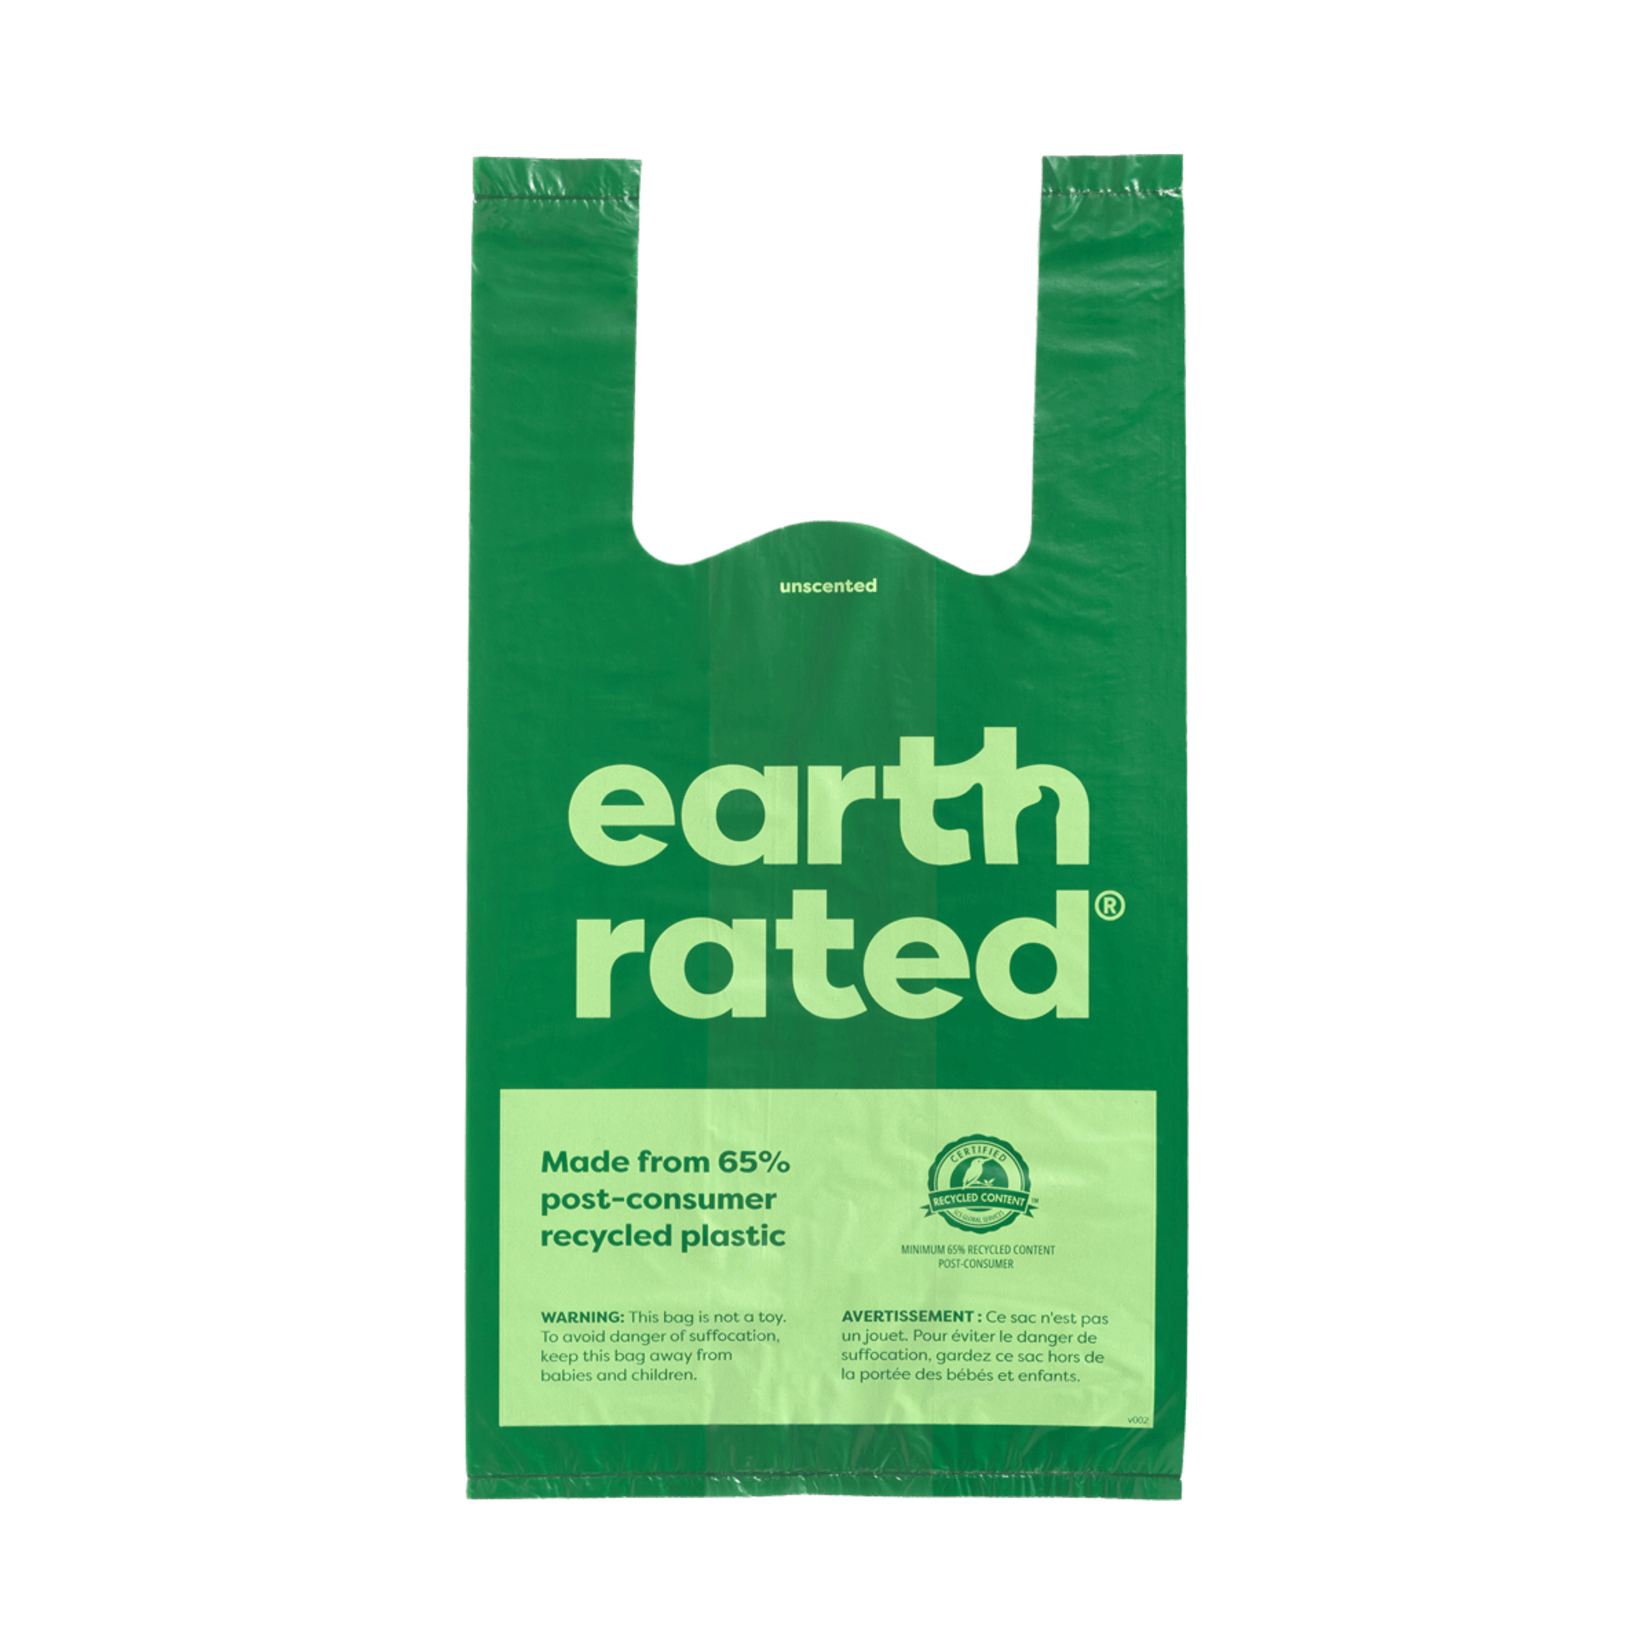 Earthborn Earth Rated Easy-Tie Poop Bags w/Handles 120ct Unscented or Lavender